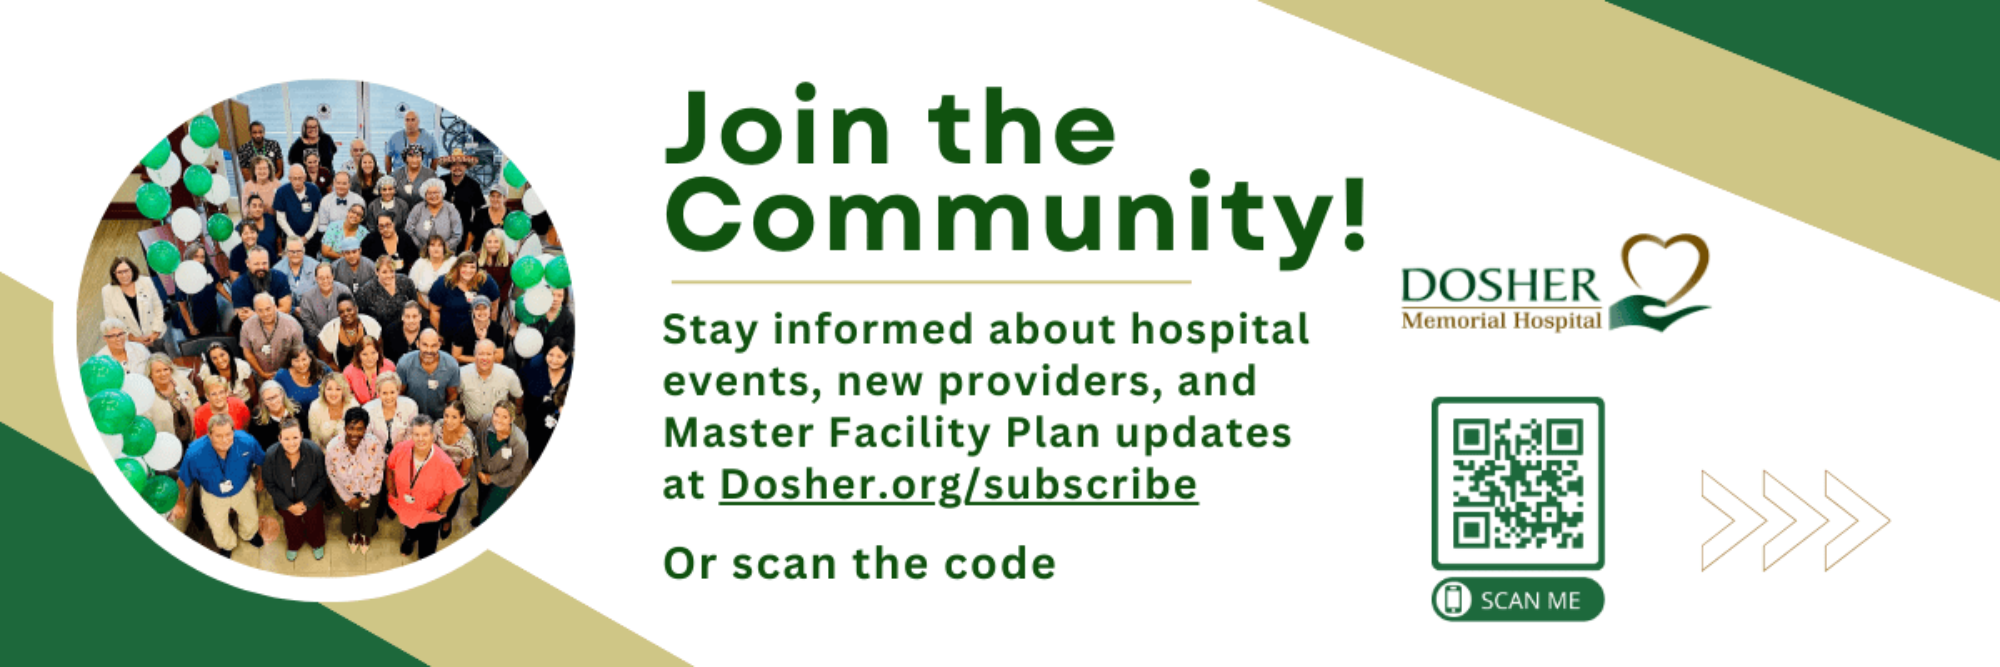 Join the Community!

Stay informed about hospital events, new providers, and Master Facility Plan updates at Dosher.org/subscribe or scan the code.